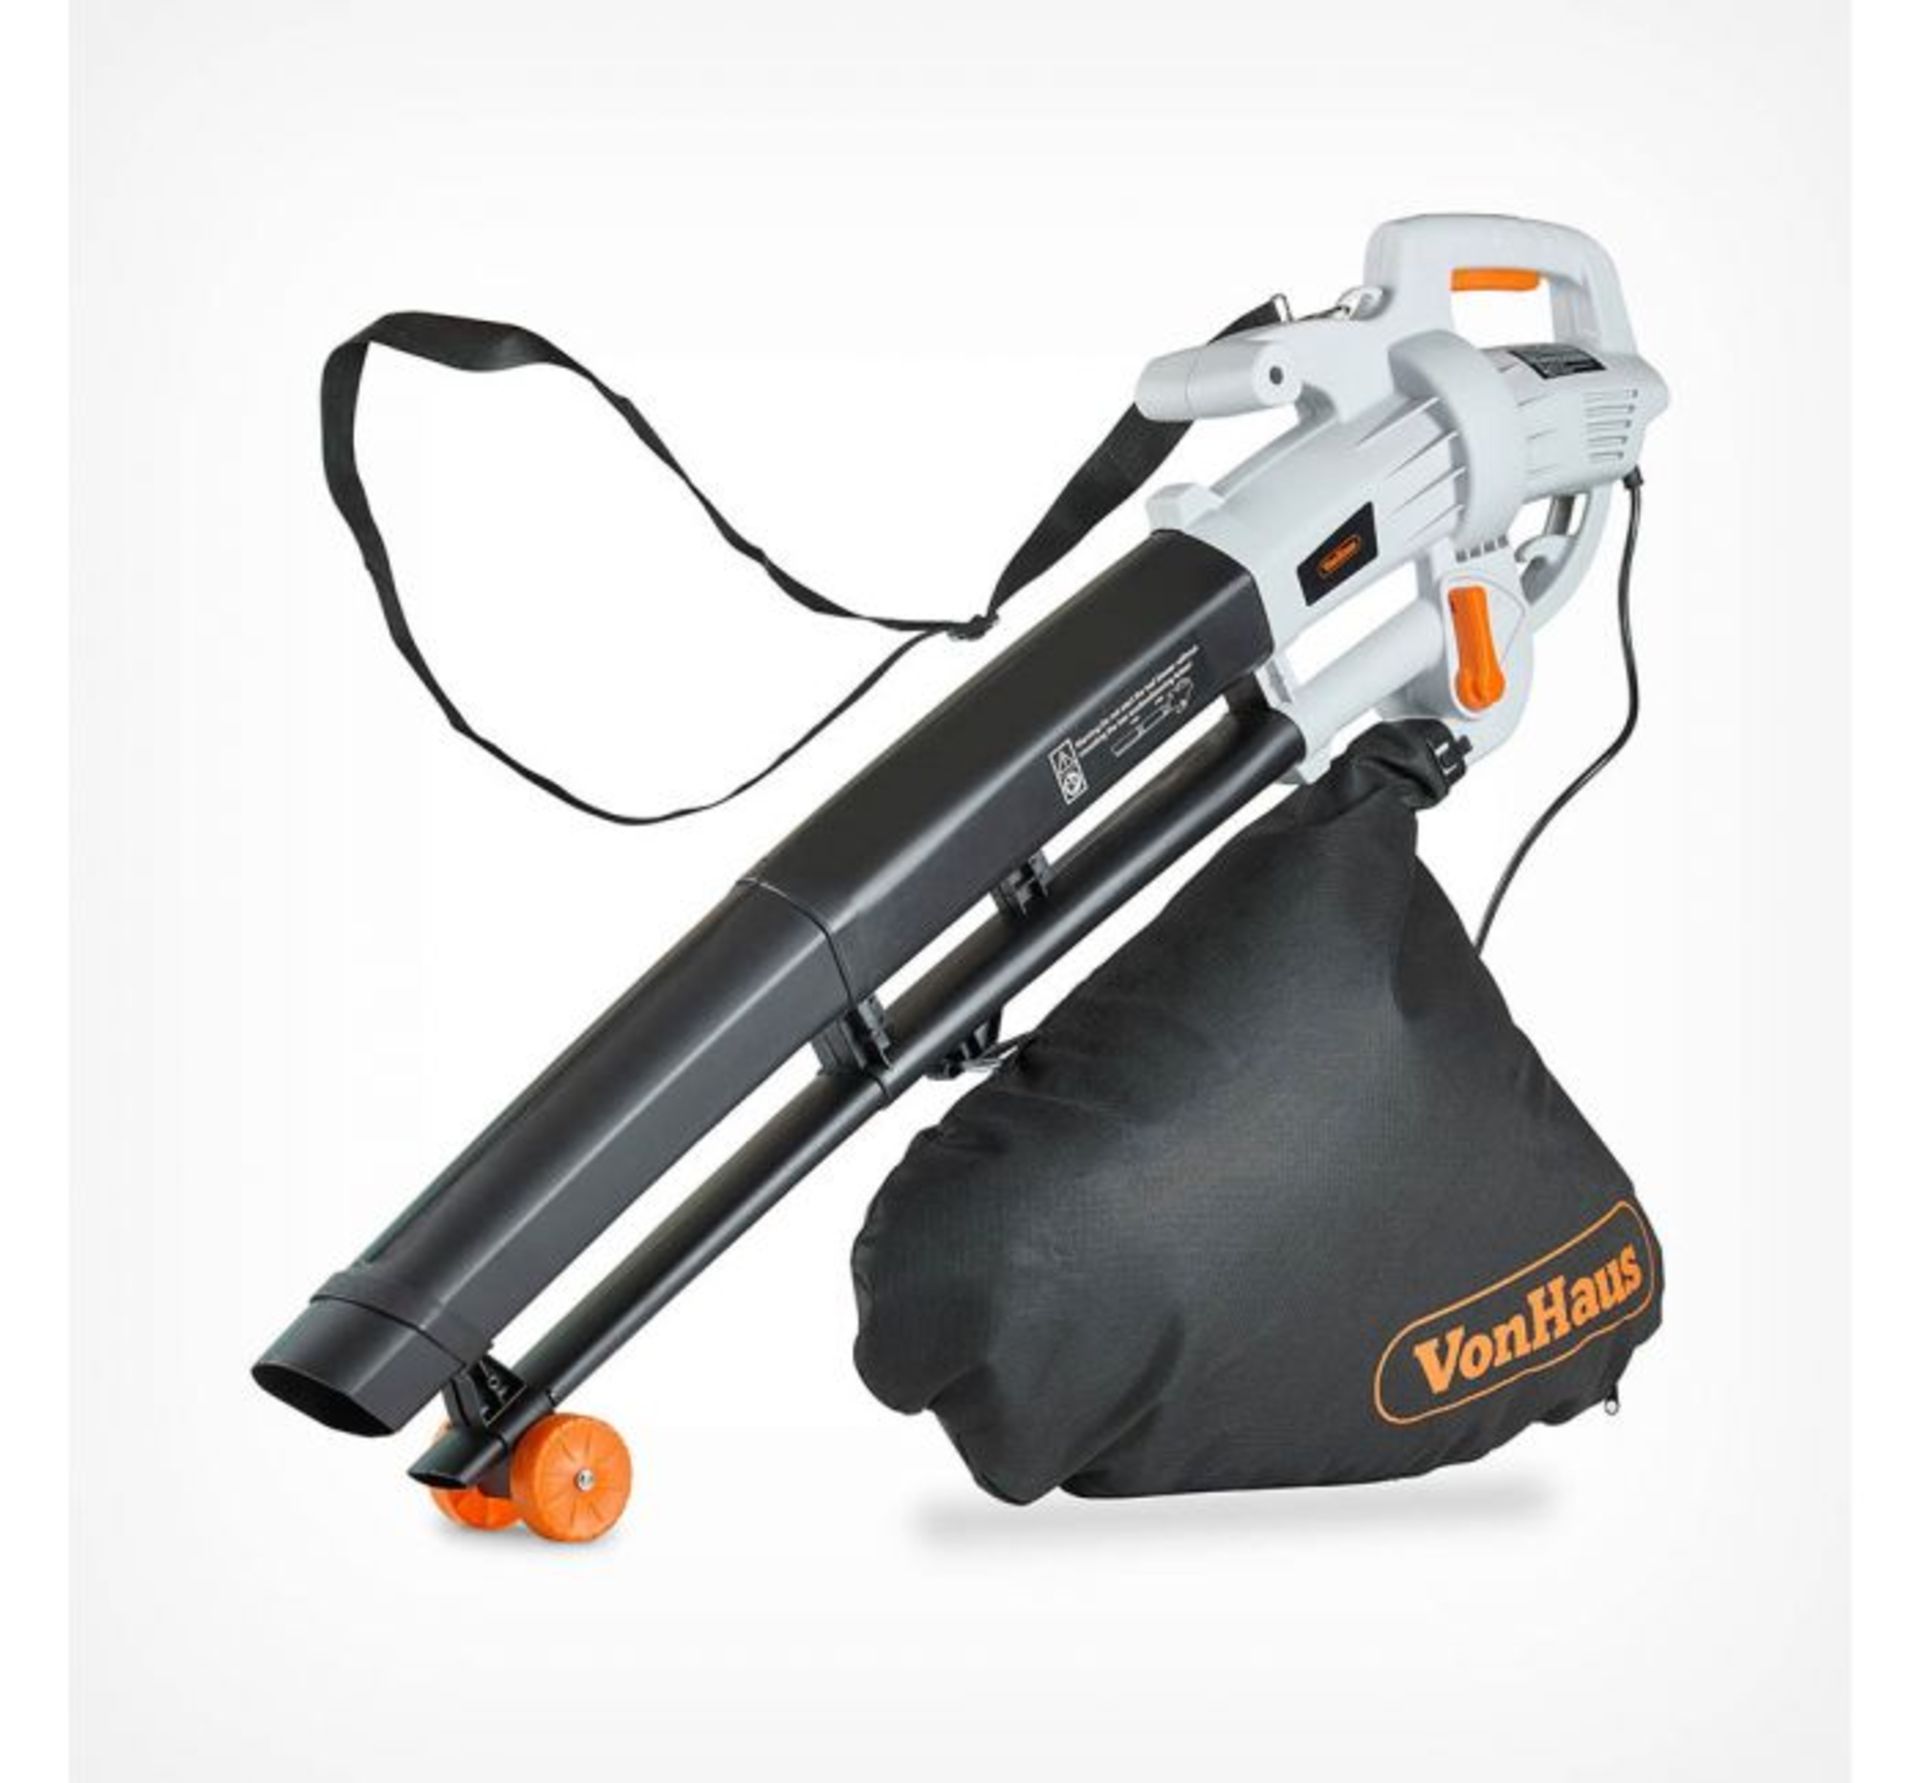 (F16) 3000W Leaf Blower Powerful 3000W motor blows, vacuums and mulches leaves Automatic mulc... - Image 2 of 4